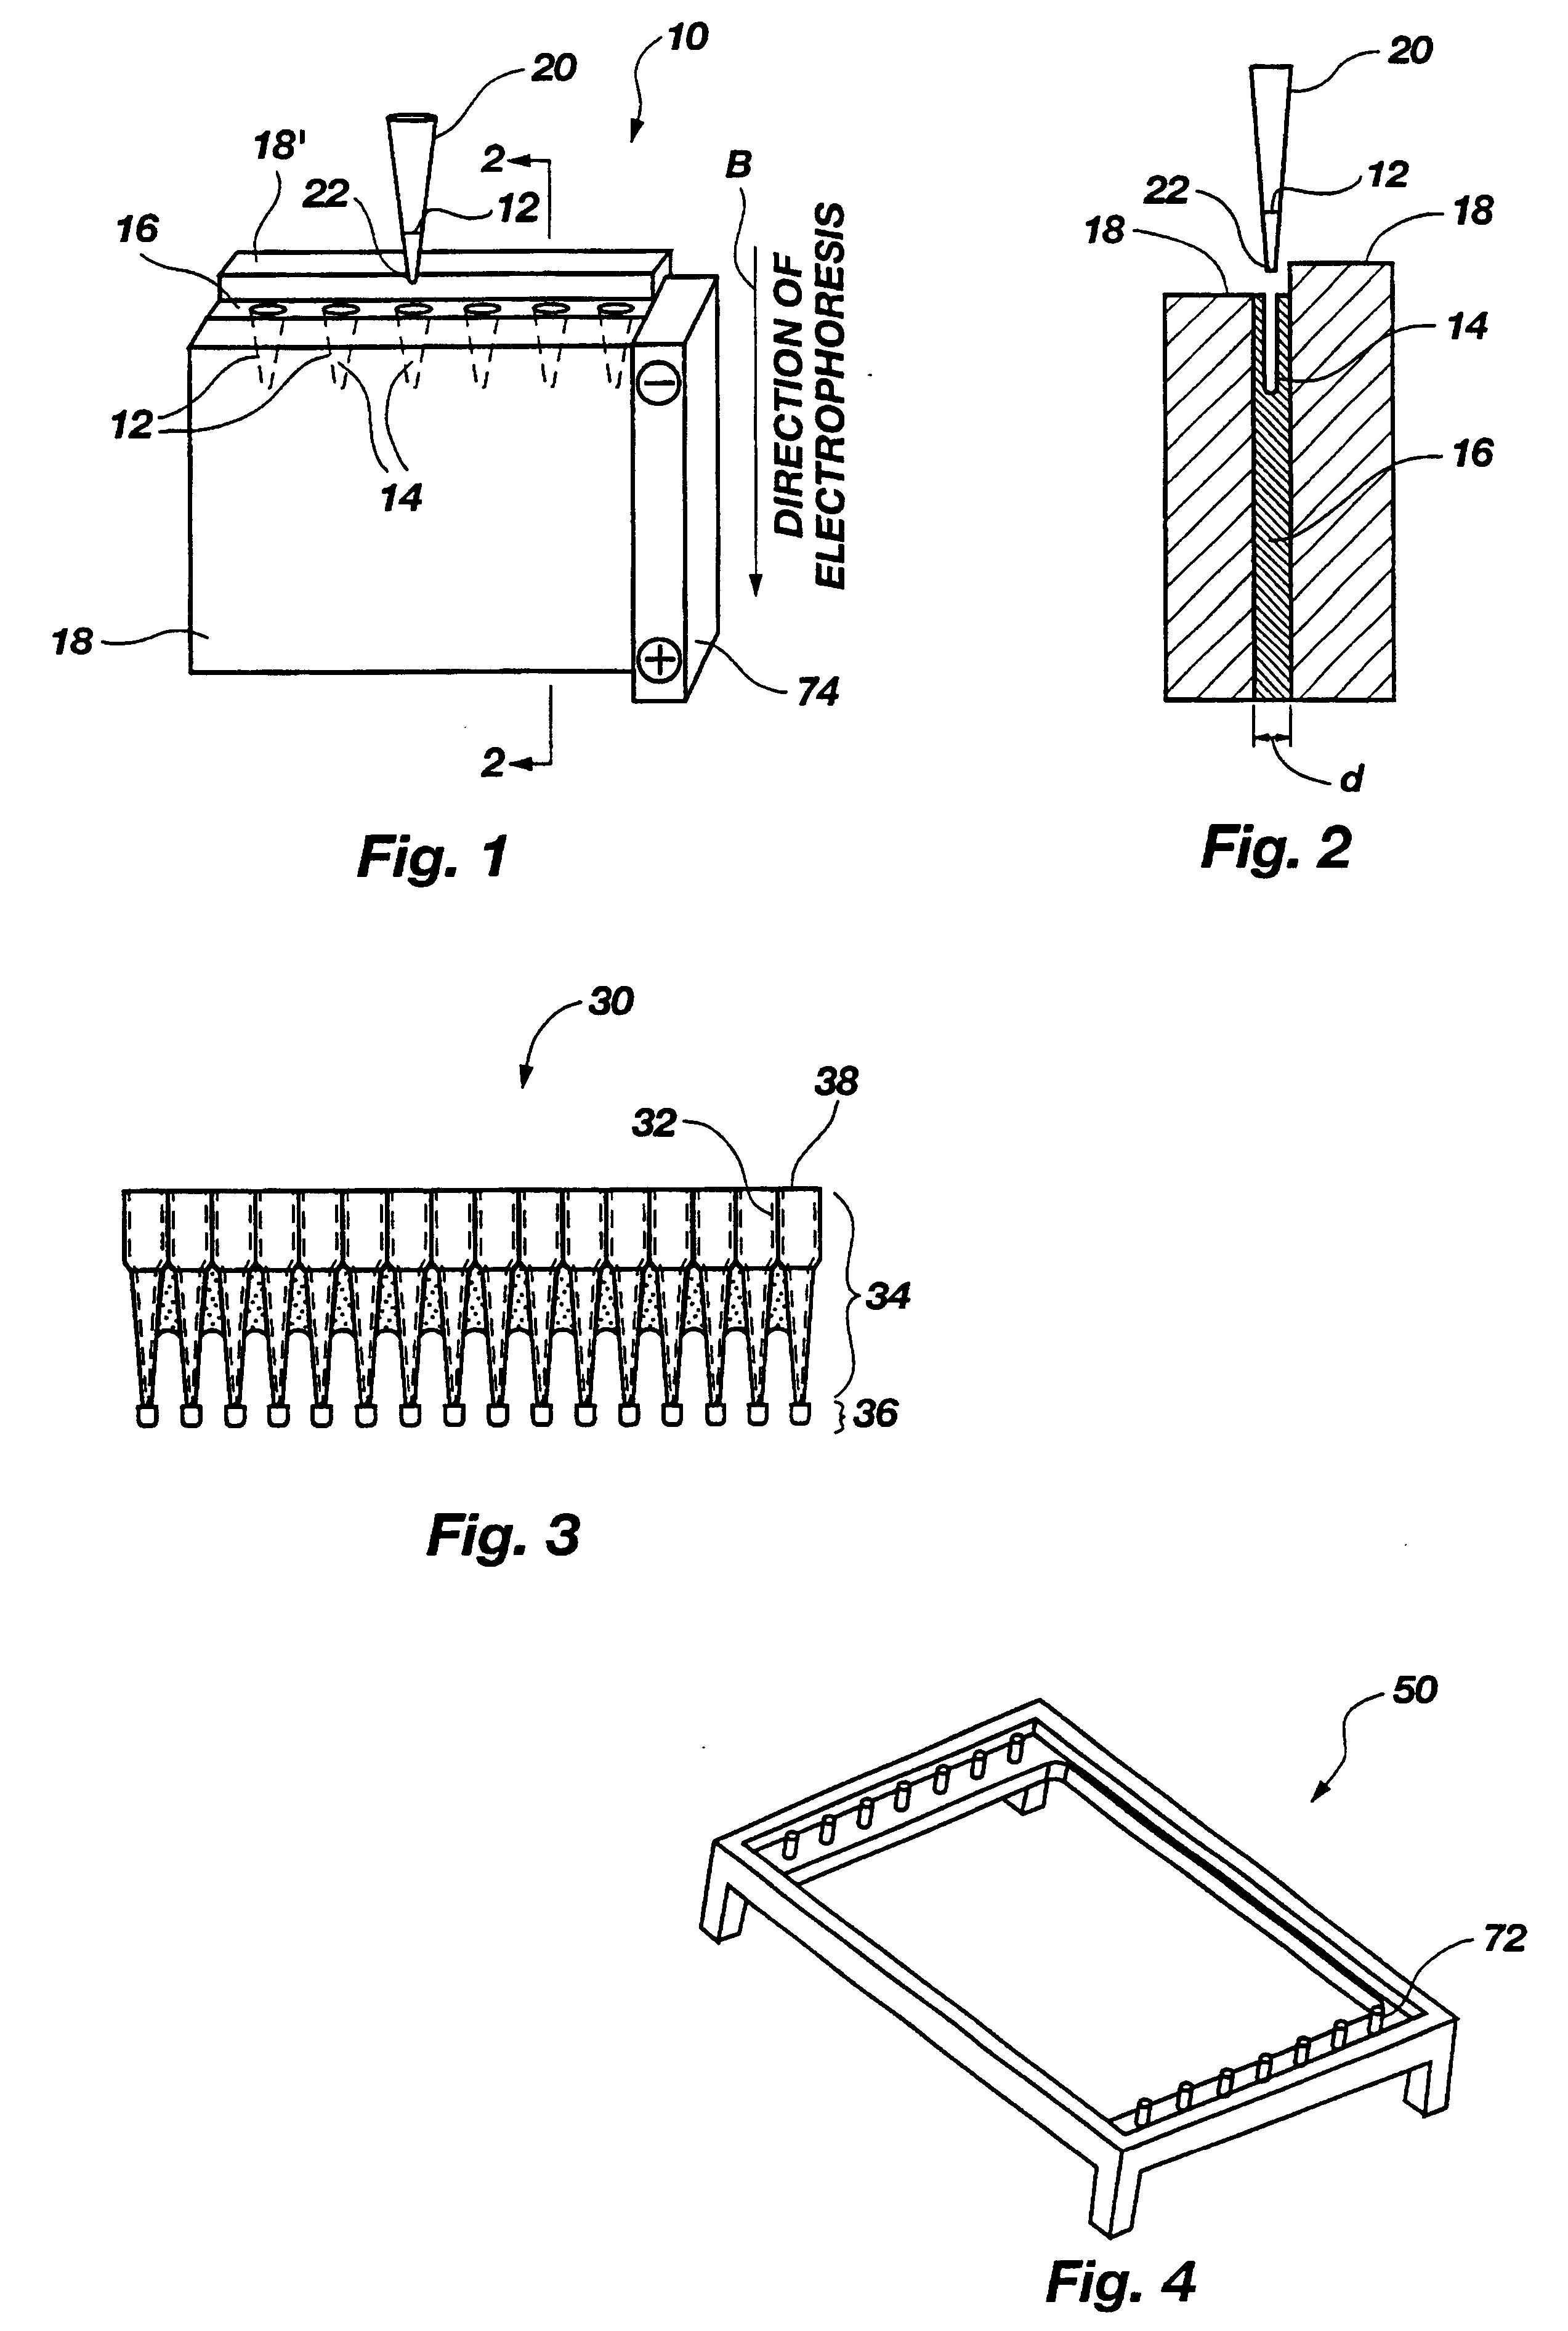 Expandable sequencing tray